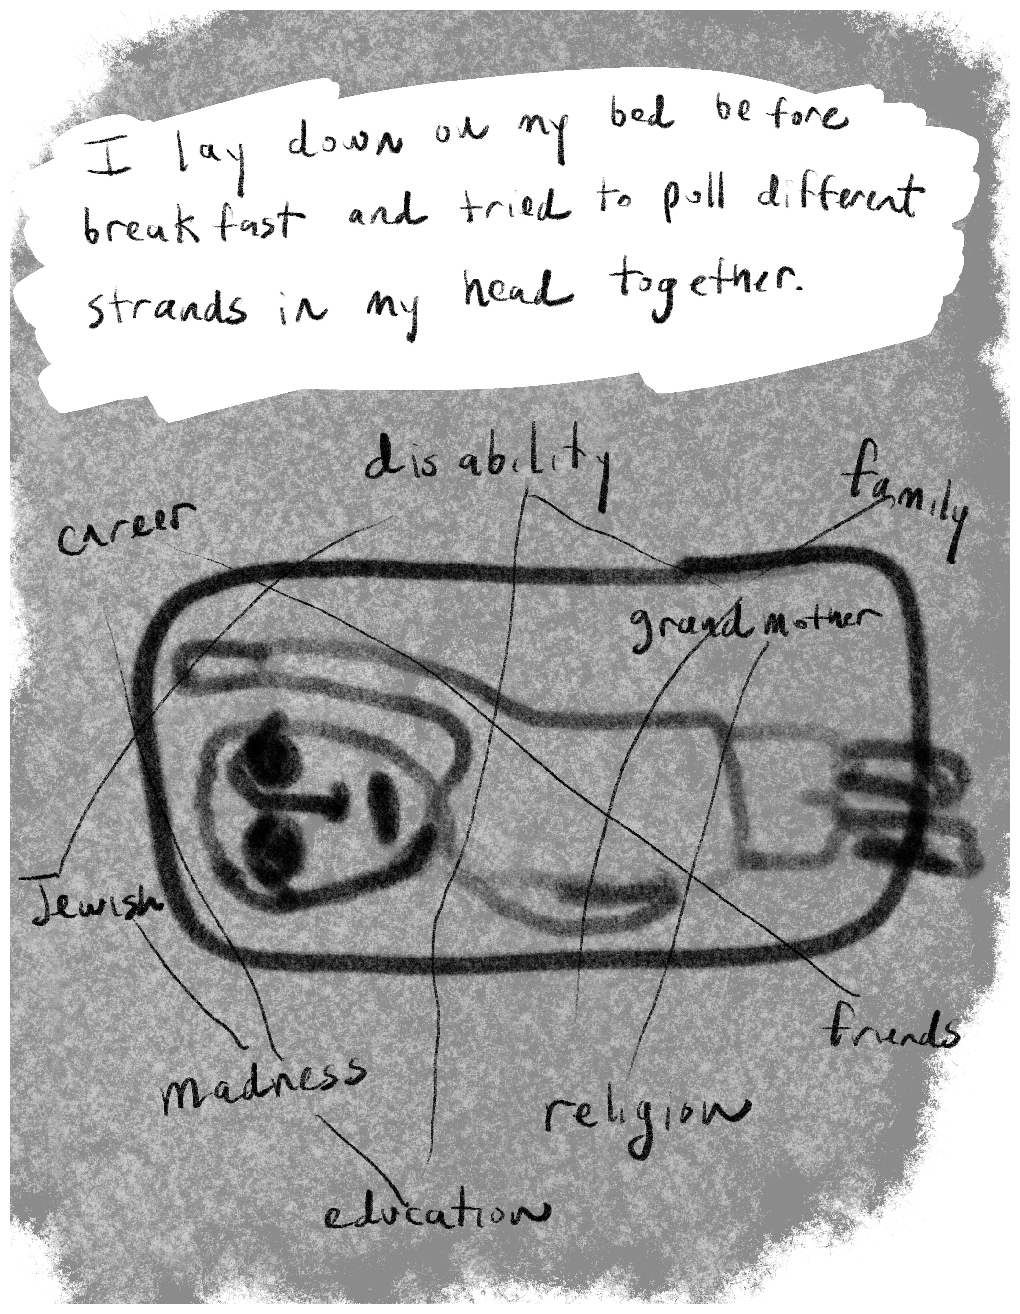 Panel four of a four-panel comic called 'Reclaiming reality', consisting of thick black line drawing and hand written text against a mottled grey and white background. The text at the top of the panel says "I lay down on my bed before breakfast and tried to pull different strands in my head together." Beneath this is a crudely drawn figure lying flat on a bed looking up, their left arm raised up next to their head on the bed. the bed is surrounded by the words: career, disability, family, grandmother, friends, religion, madness and Jewish. The words are connected to other words by thin black lines that cut across the bed and the figure. 